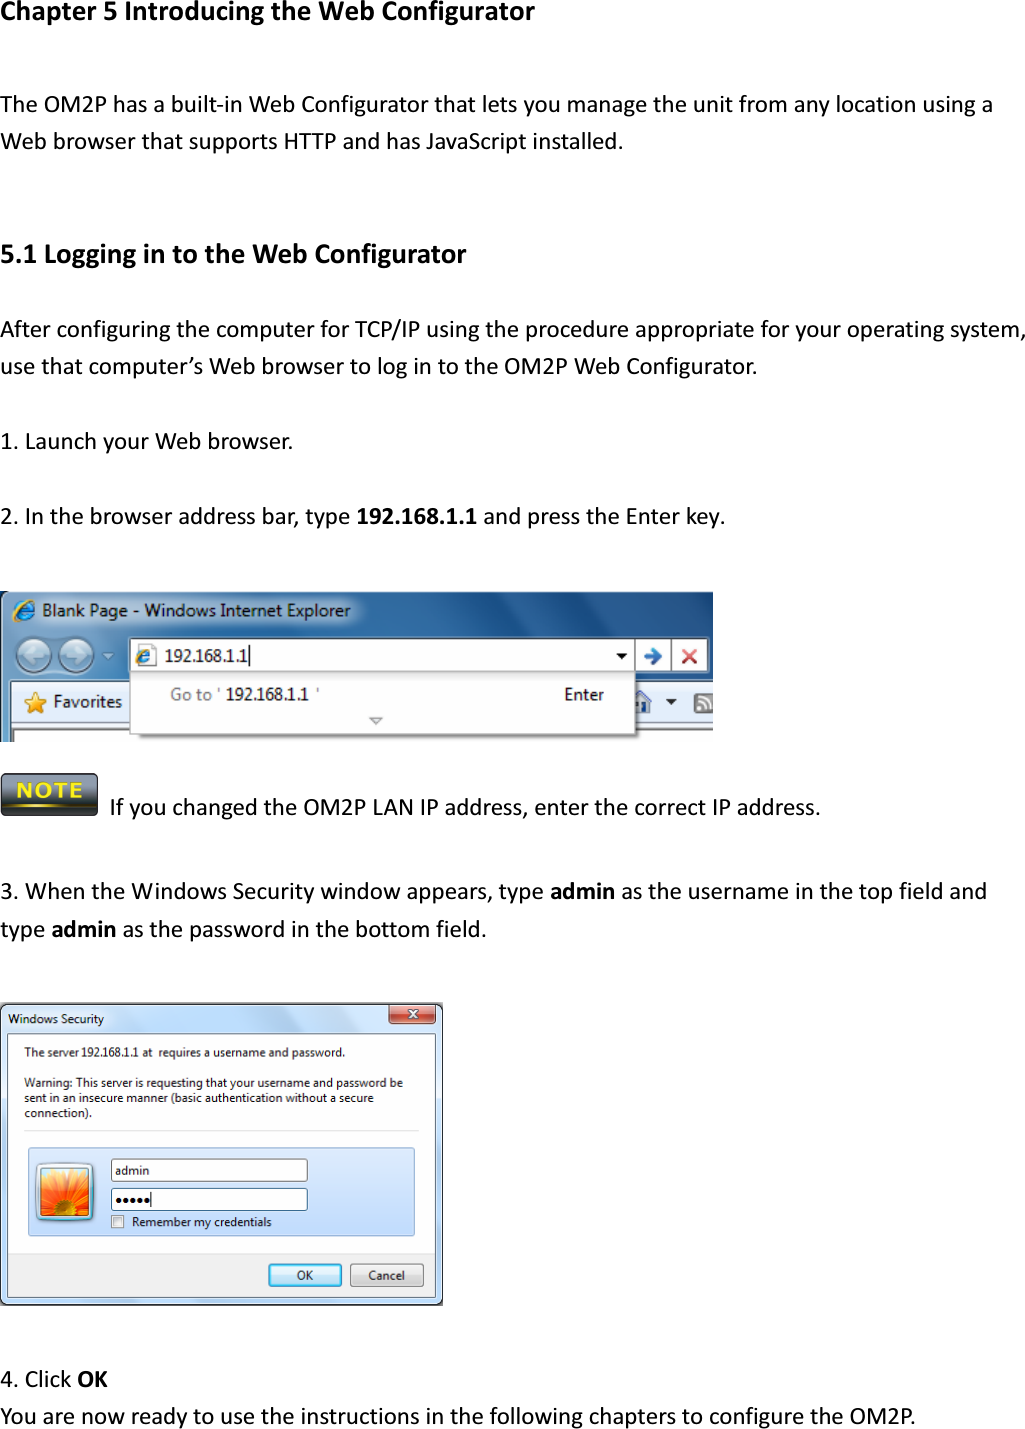 Chapter 5 Introducing the Web Configurator The OM2P has a built-in Web Configurator that lets you manage the unit from any location using a Web browser that supports HTTP and has JavaScript installed.  5.1 Logging in to the Web Configurator After configuring the computer for TCP/IP using the procedure appropriate for your operating system, use that computer’s Web browser to log in to the OM2P Web Configurator.  1. Launch your Web browser.  2. In the browser address bar, type 192.168.1.1 and press the Enter key.     If you changed the OM2P LAN IP address, enter the correct IP address.  3. When the Windows Security window appears, type admin as the username in the top field and type admin as the password in the bottom field.    4. Click OK   You are now ready to use the instructions in the following chapters to configure the OM2P.  